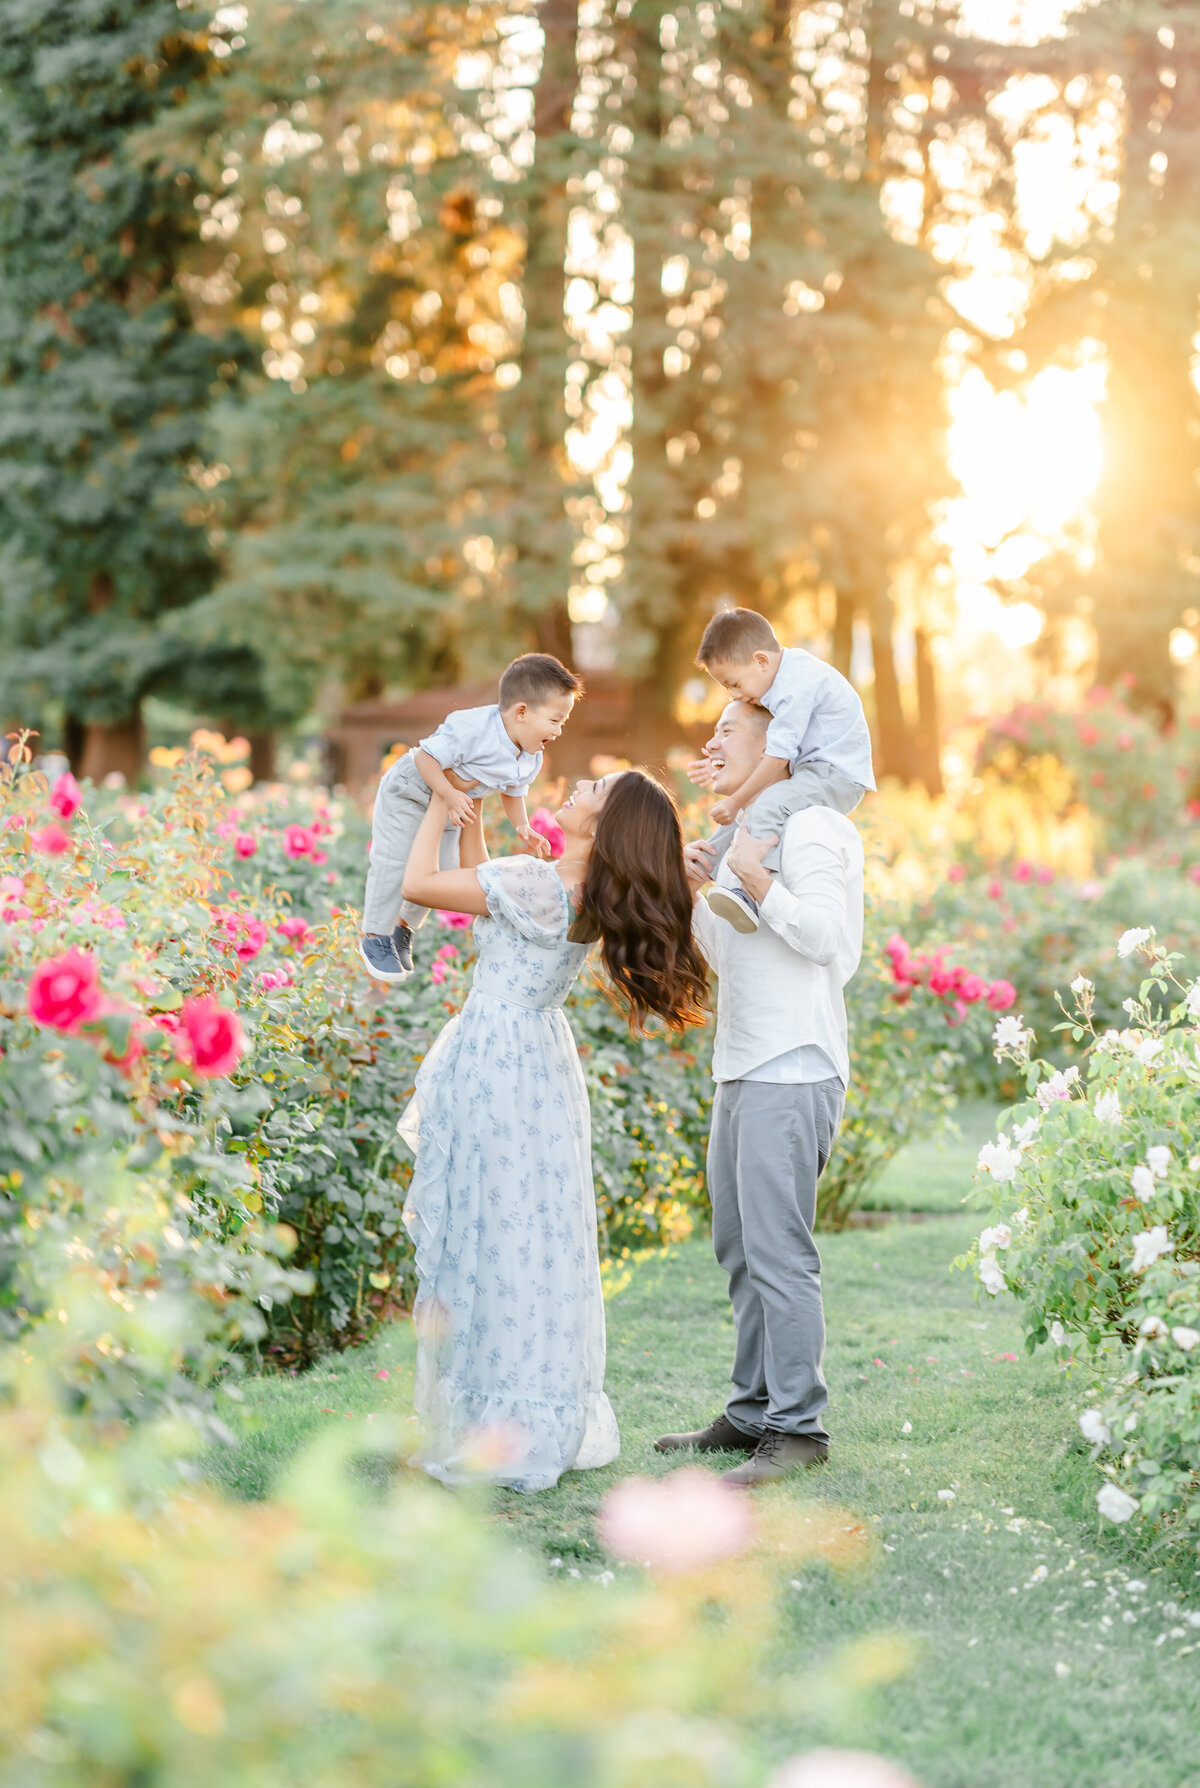 A family session photographed by Bay Area Photographer, Light Livin Photography shows a family playing and laughing together in a field of roses.